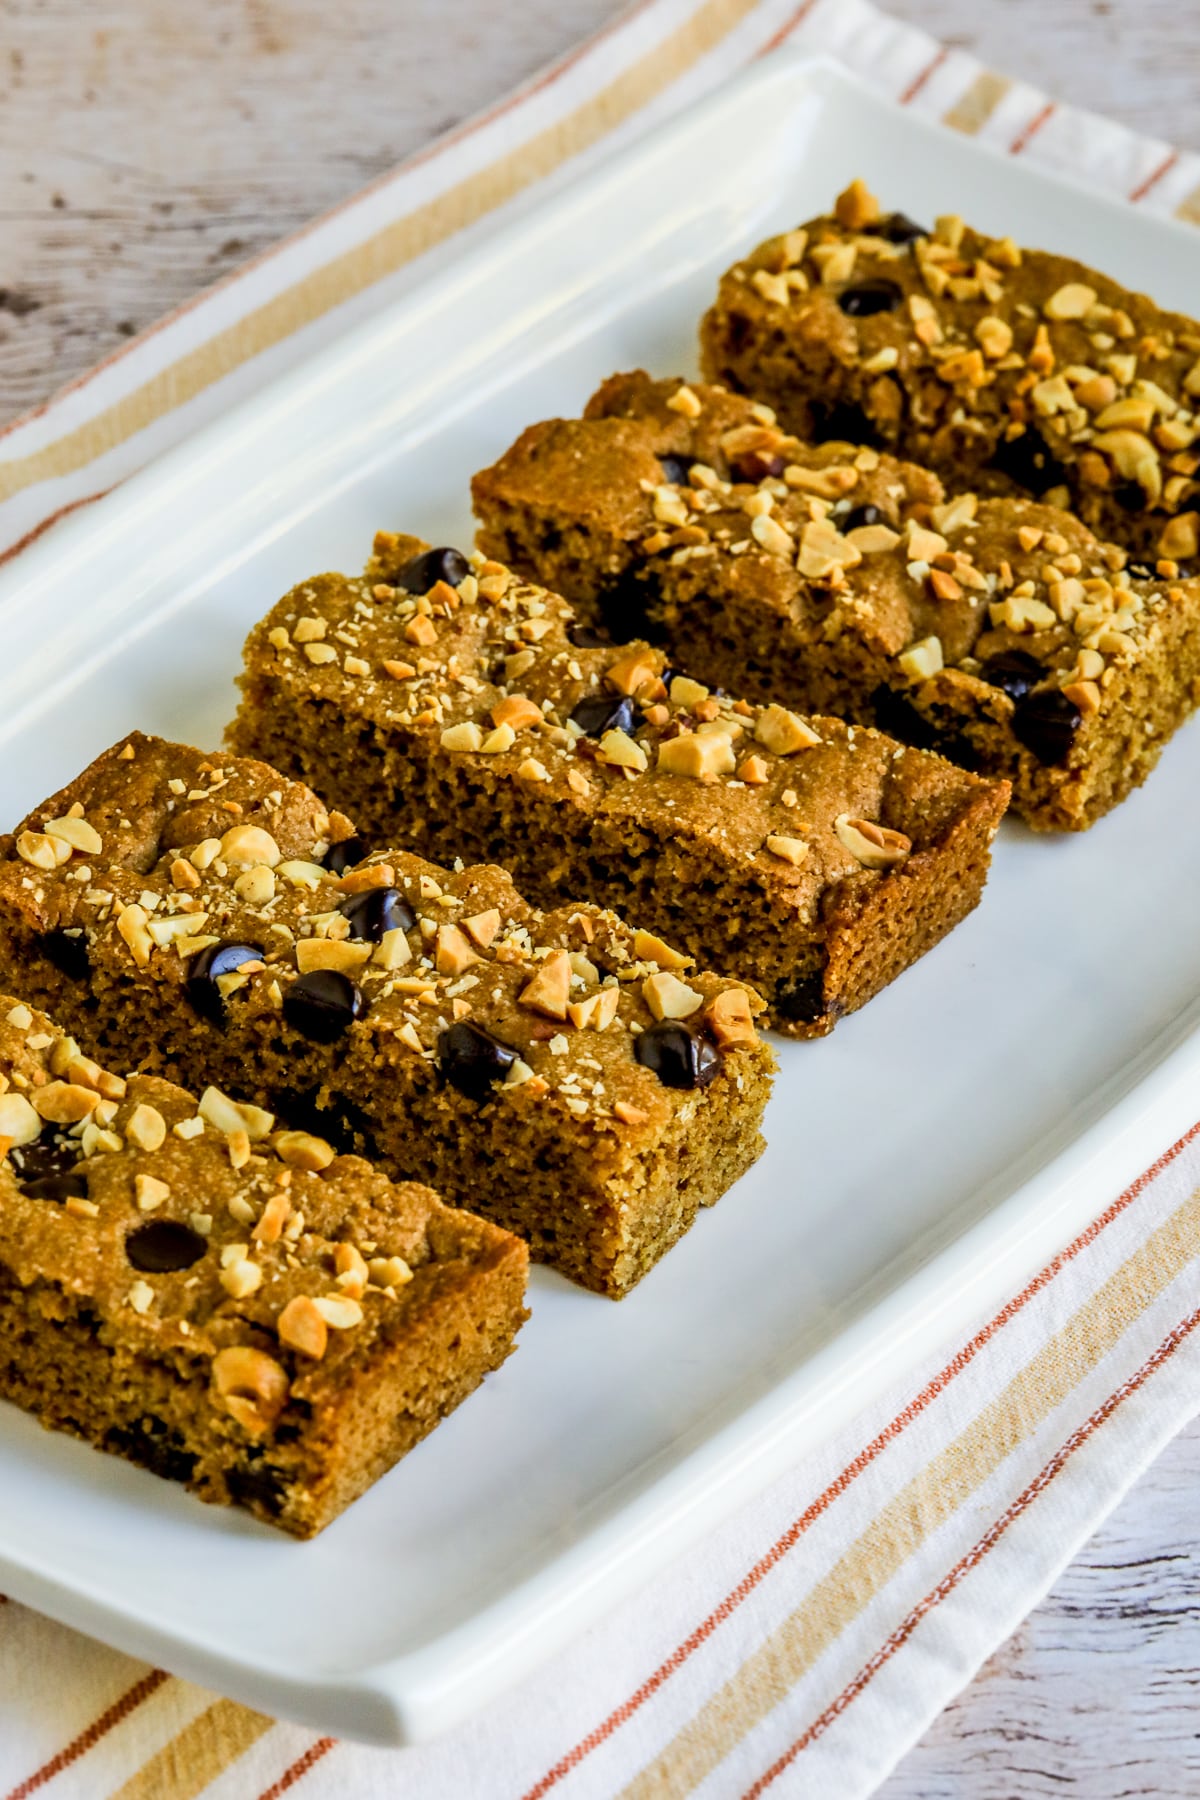 Peanut Butter Chocolate Chip Bars shown on serving platter on napkin.